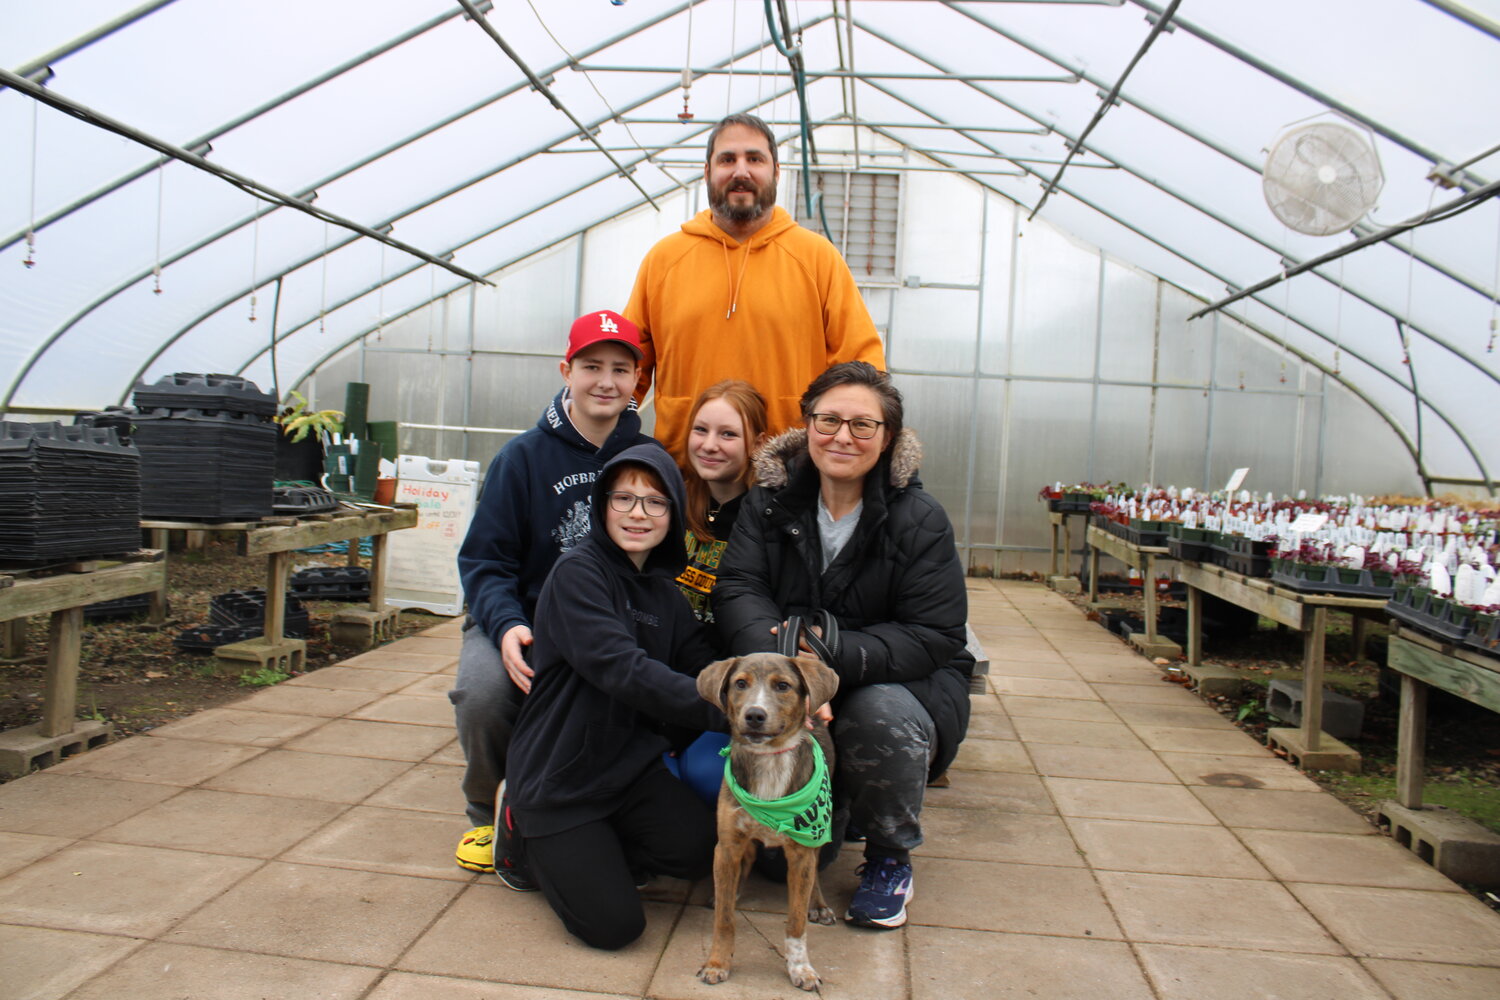 The Feit family with their newly adopted 6-month-old dog named Cash, at Fantastic Gardens. Cash had only arrived at Last Chance a week prior.